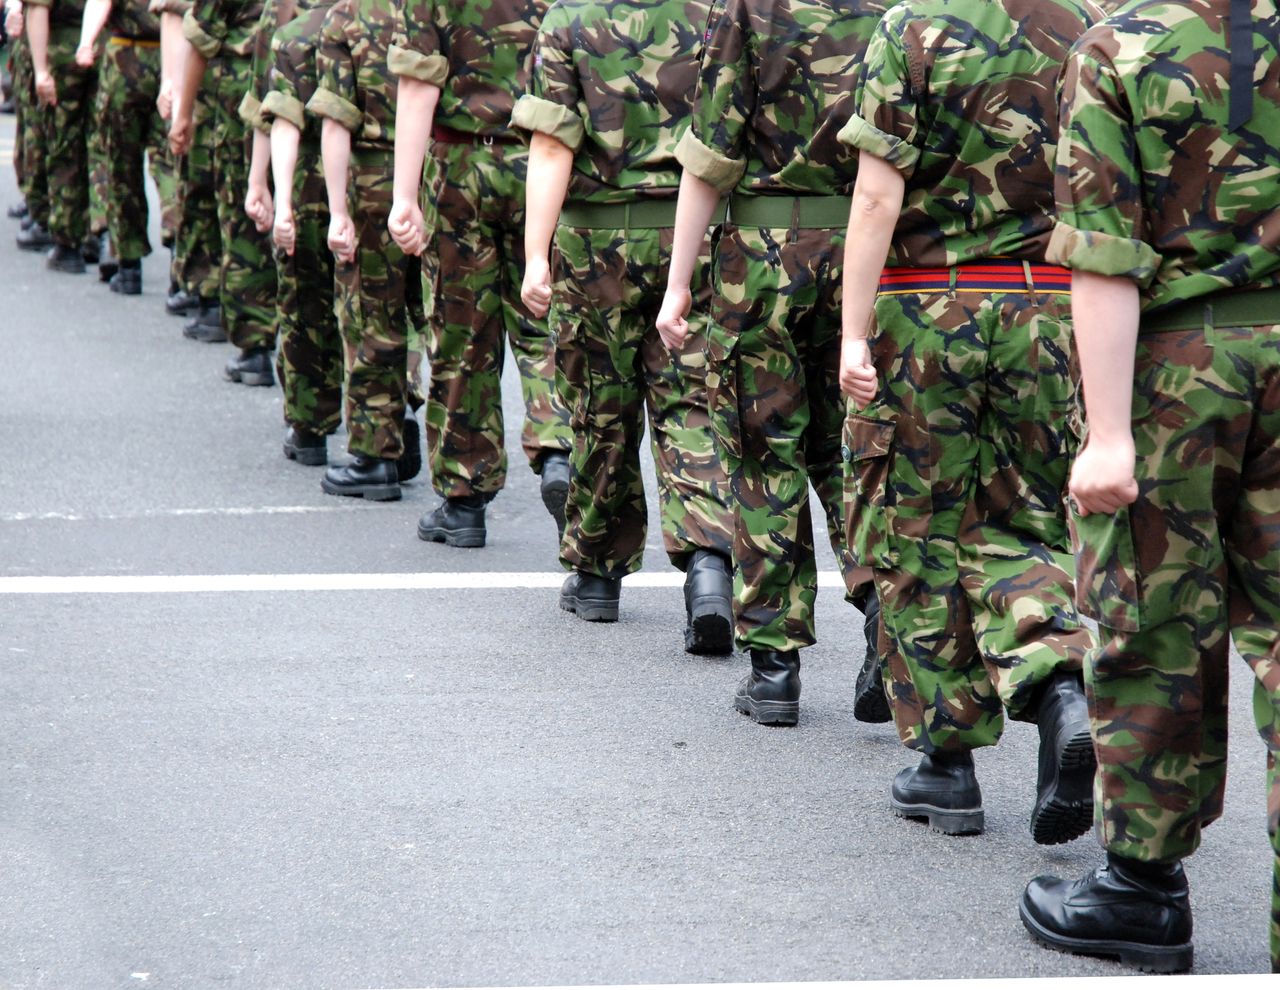 Britain plans mandatory military service for 18-year-olds